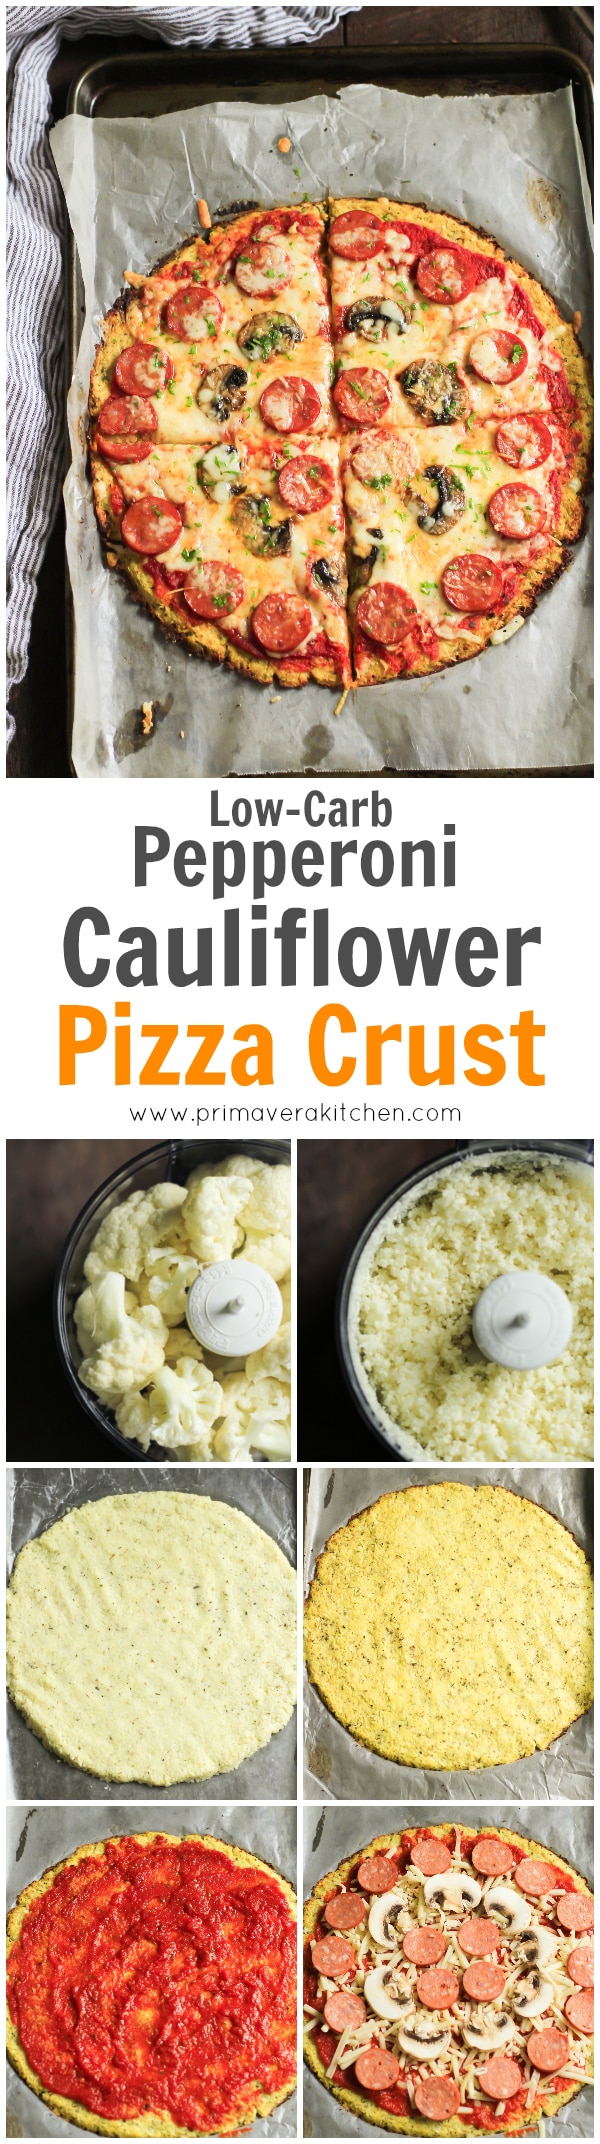 Low-Carb Pepperoni Cauliflower Pizza Crust - Avoiding carbs, but craving pizza? How about trying this Low-carb Pepperoni Cauliflower Pizza Crust? This is super flavorful and gluten-free. 